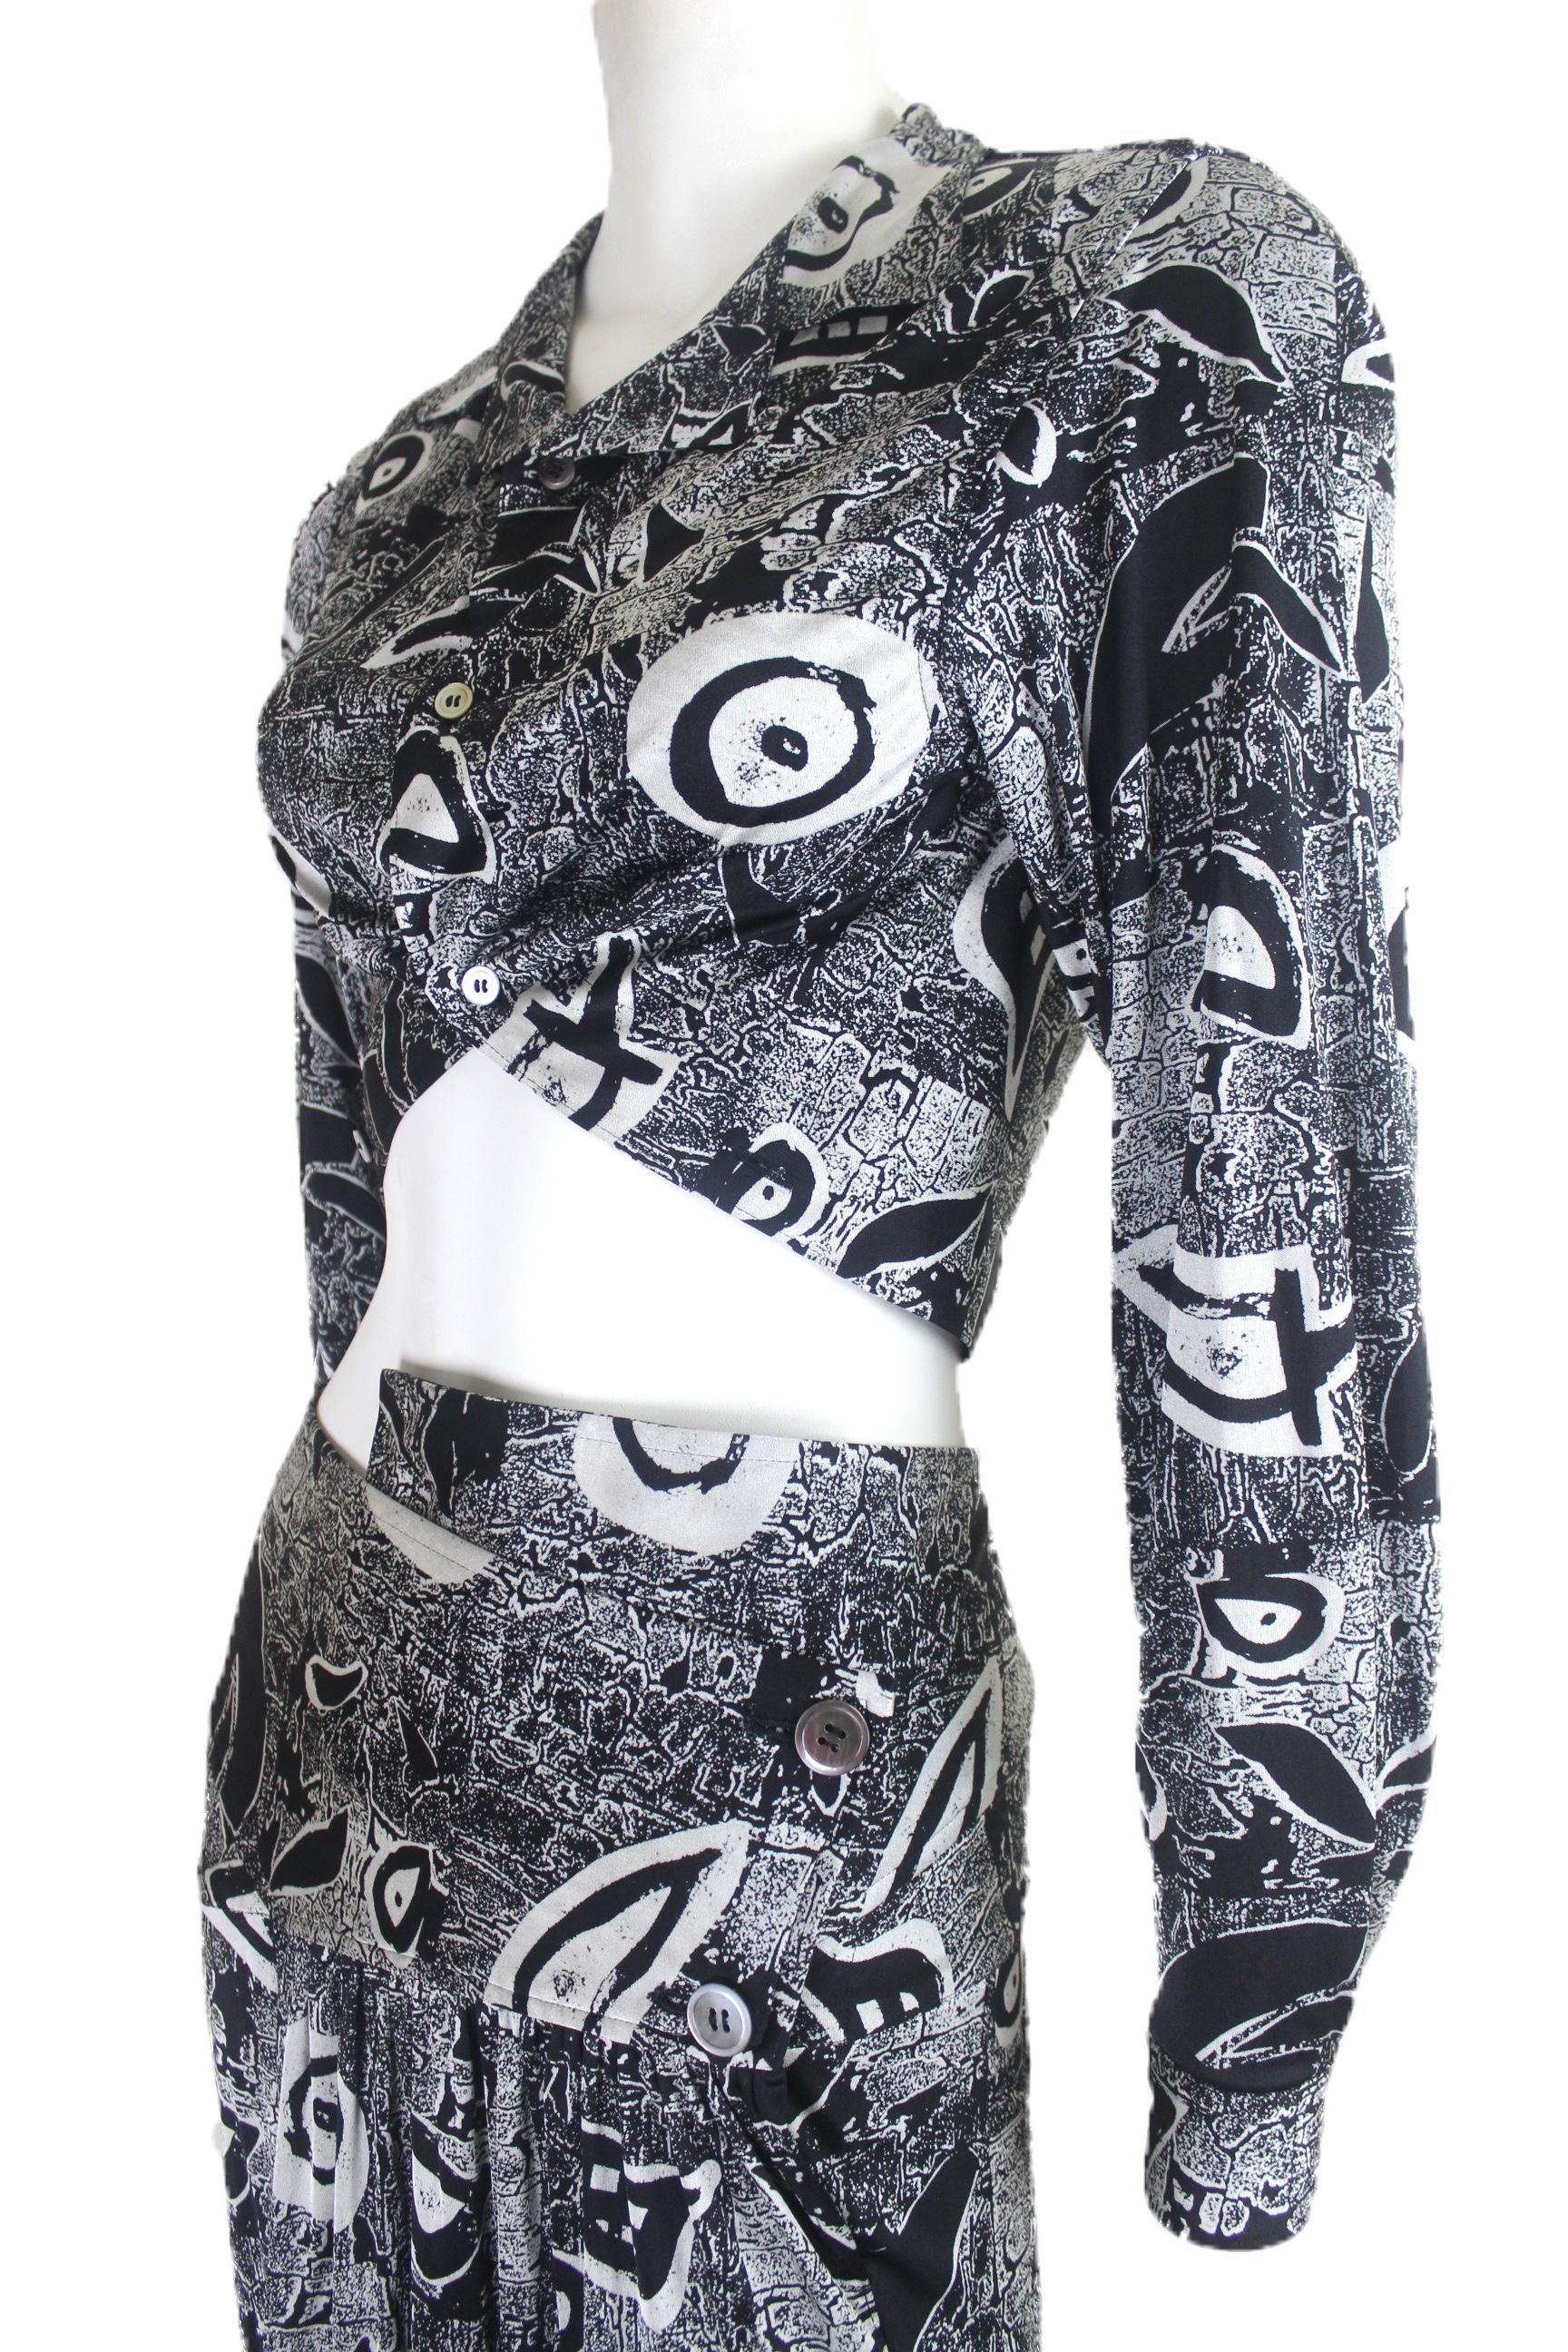 Women's Comme des Garcons Early 90's Abstract Print Skirt and Top For Sale